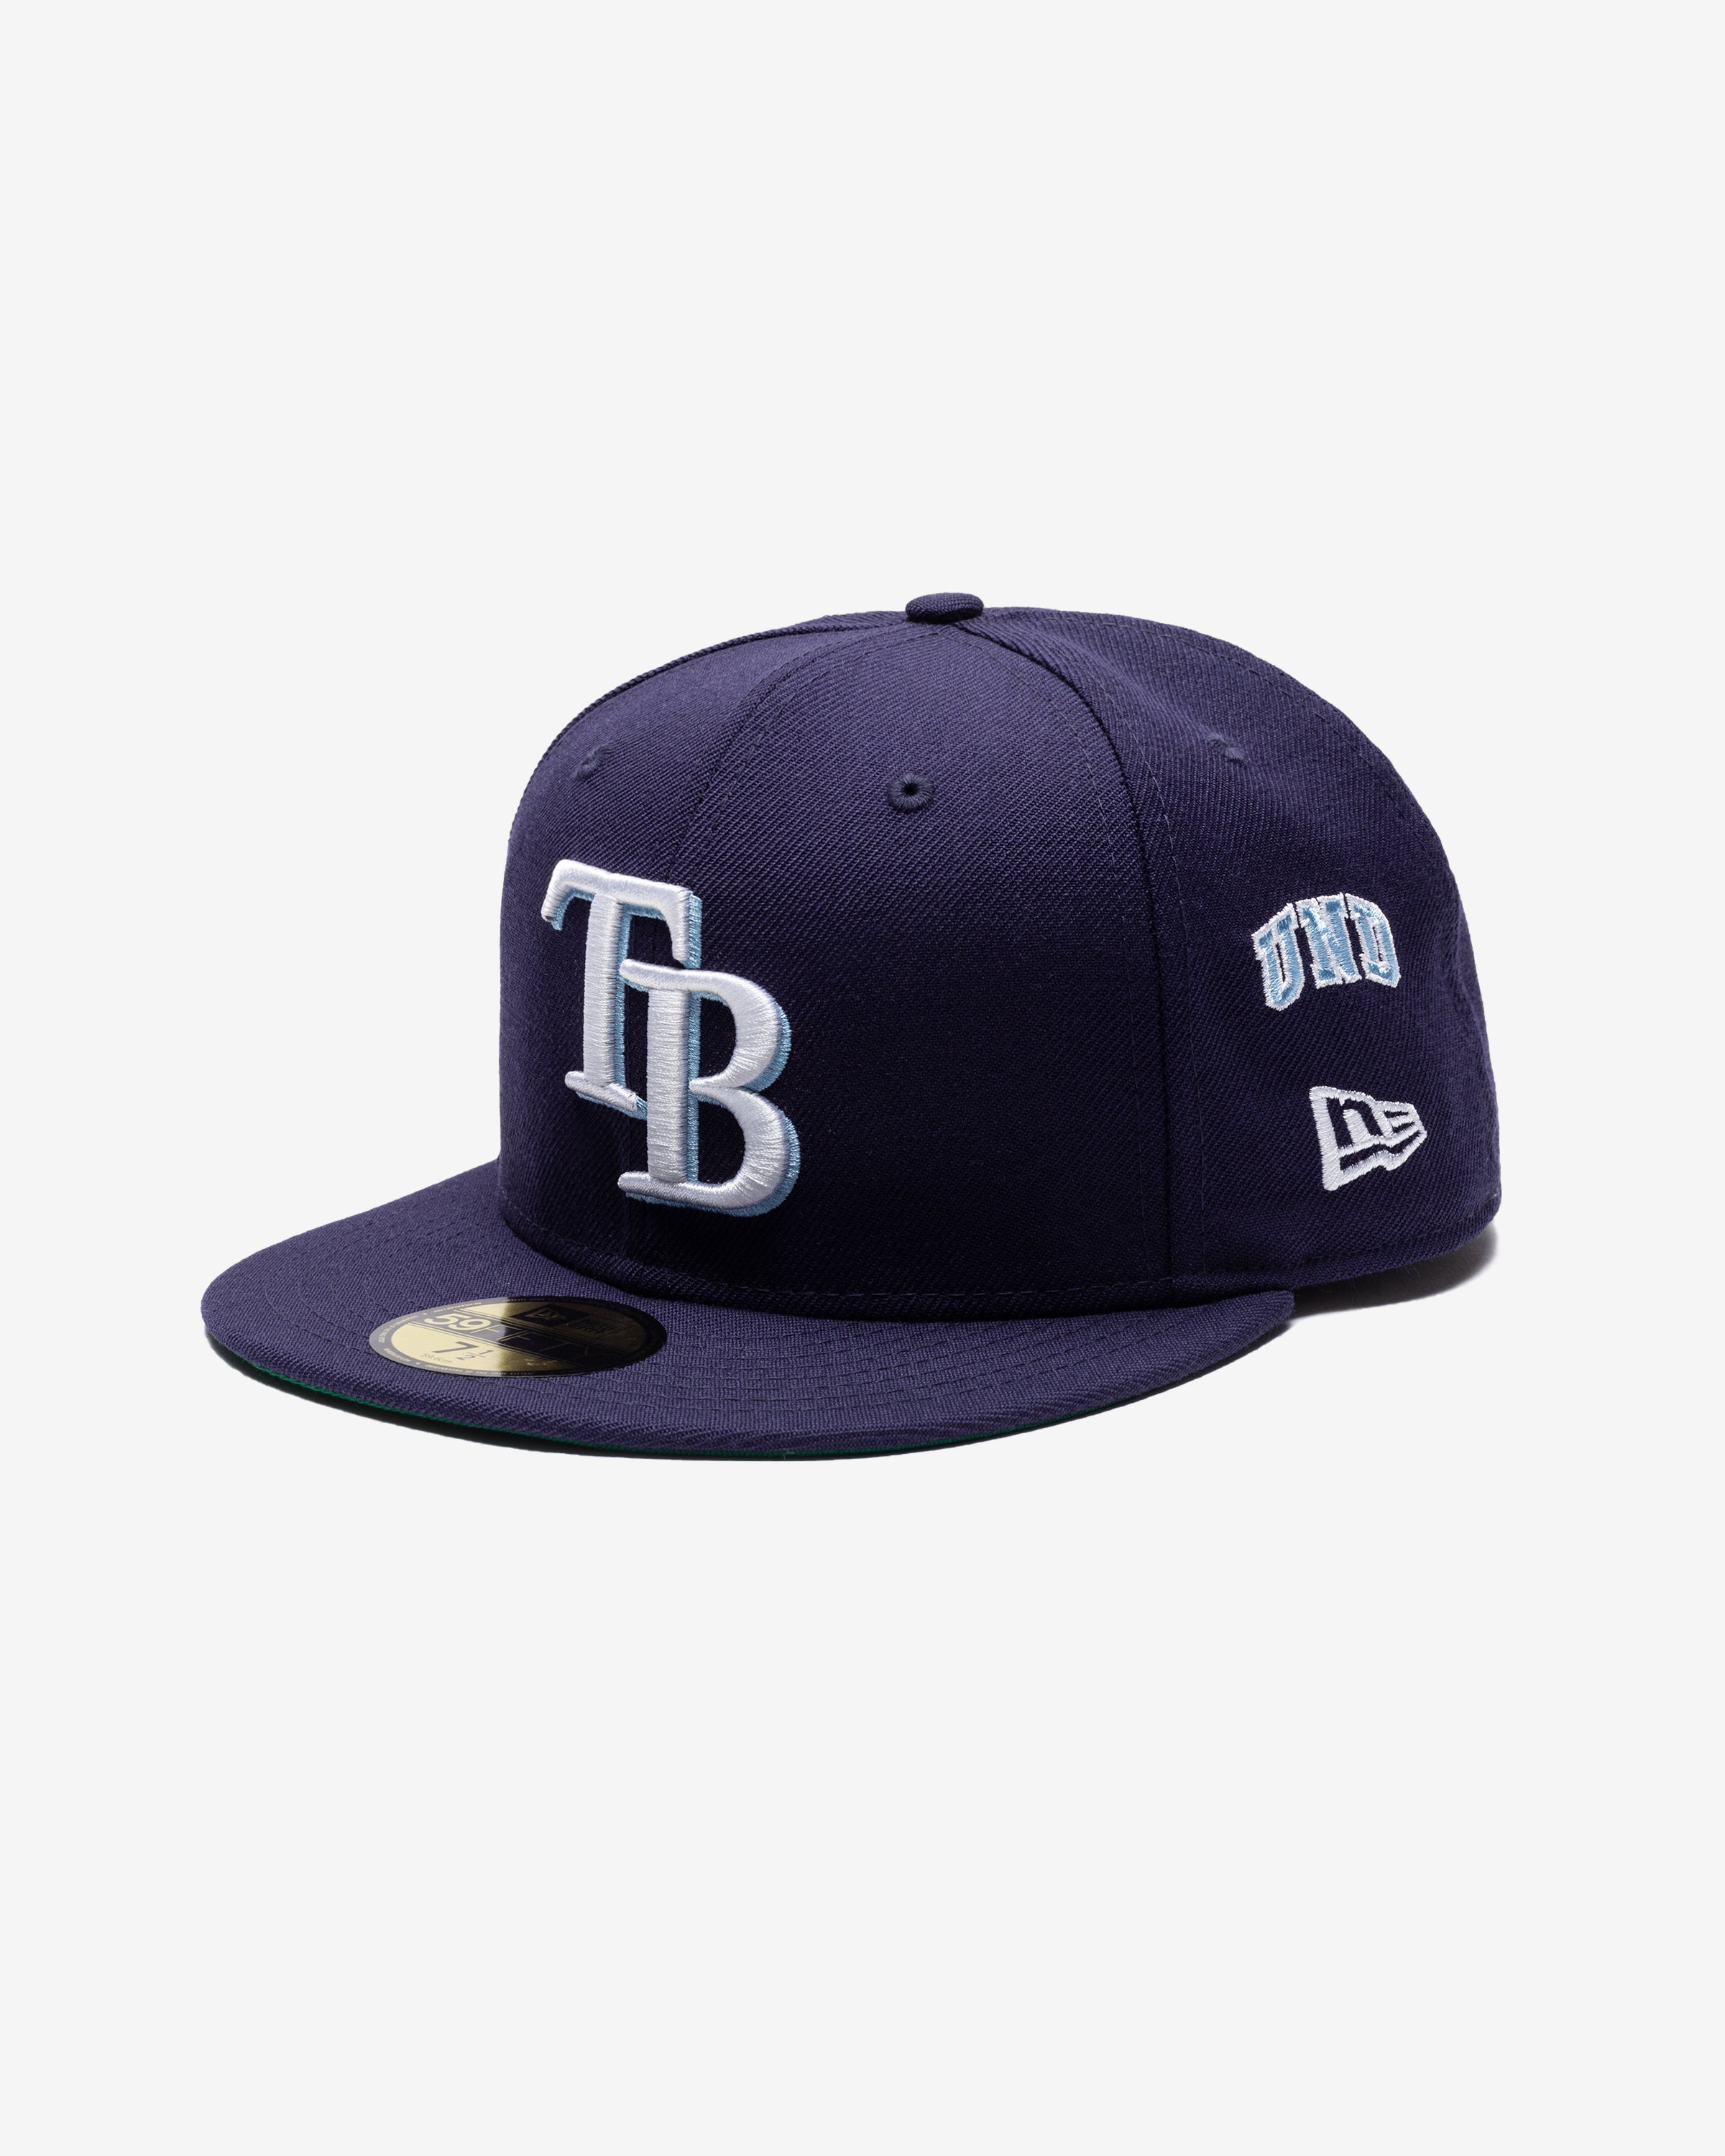 UNDEFEATED X NE X MLB FITTED - TAMPA BAY RAYS – Undefeated